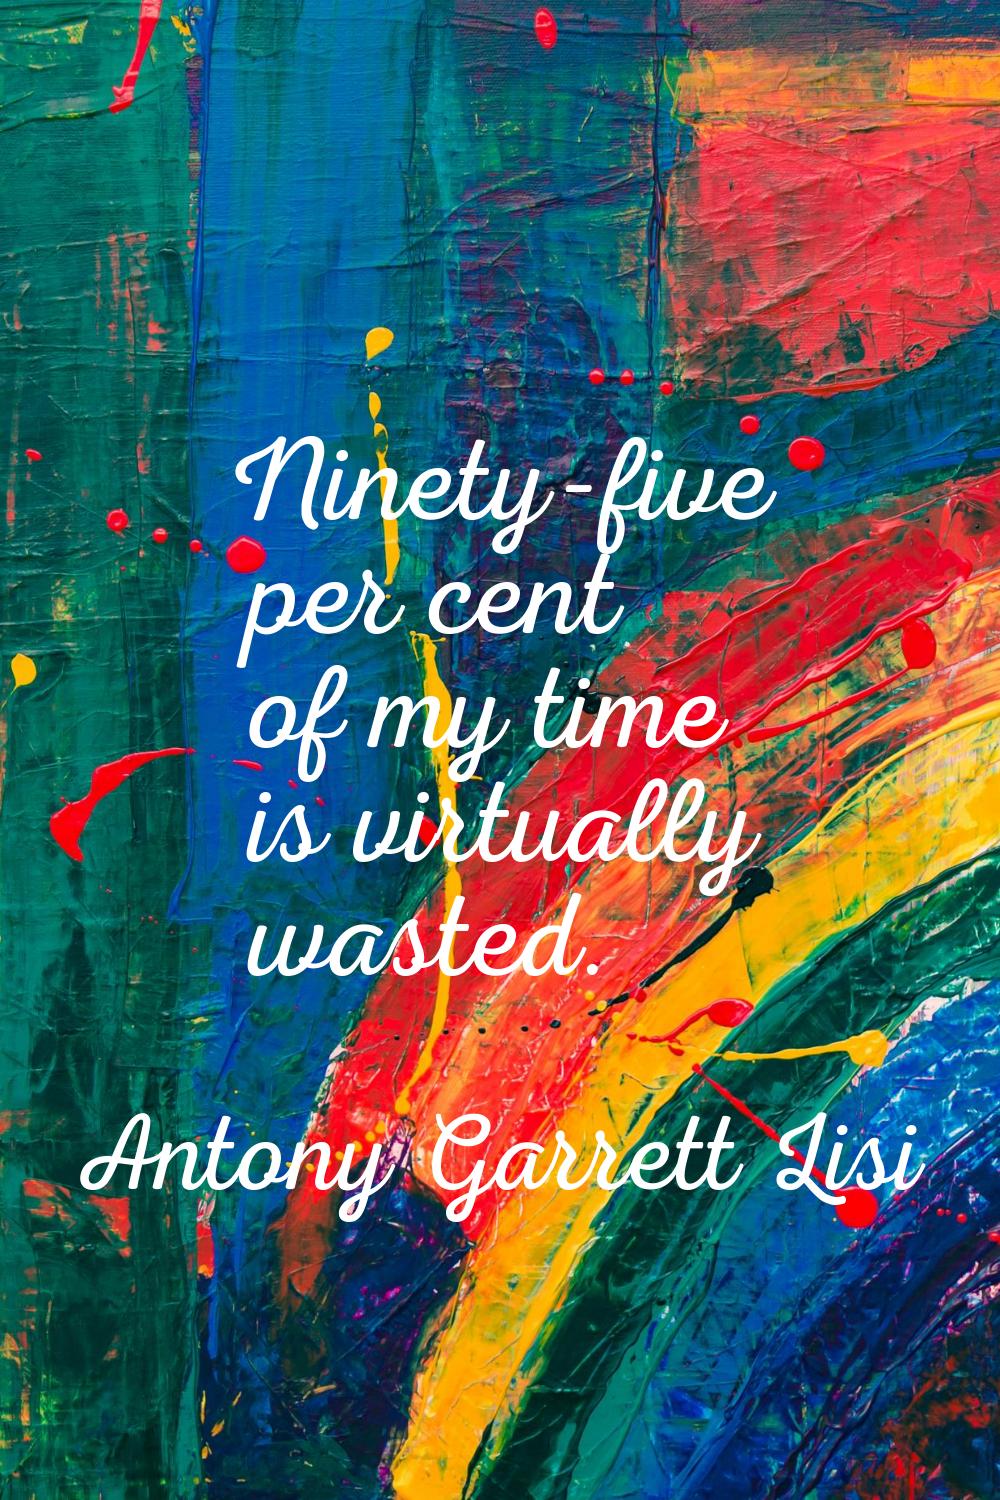 Ninety-five per cent of my time is virtually wasted.